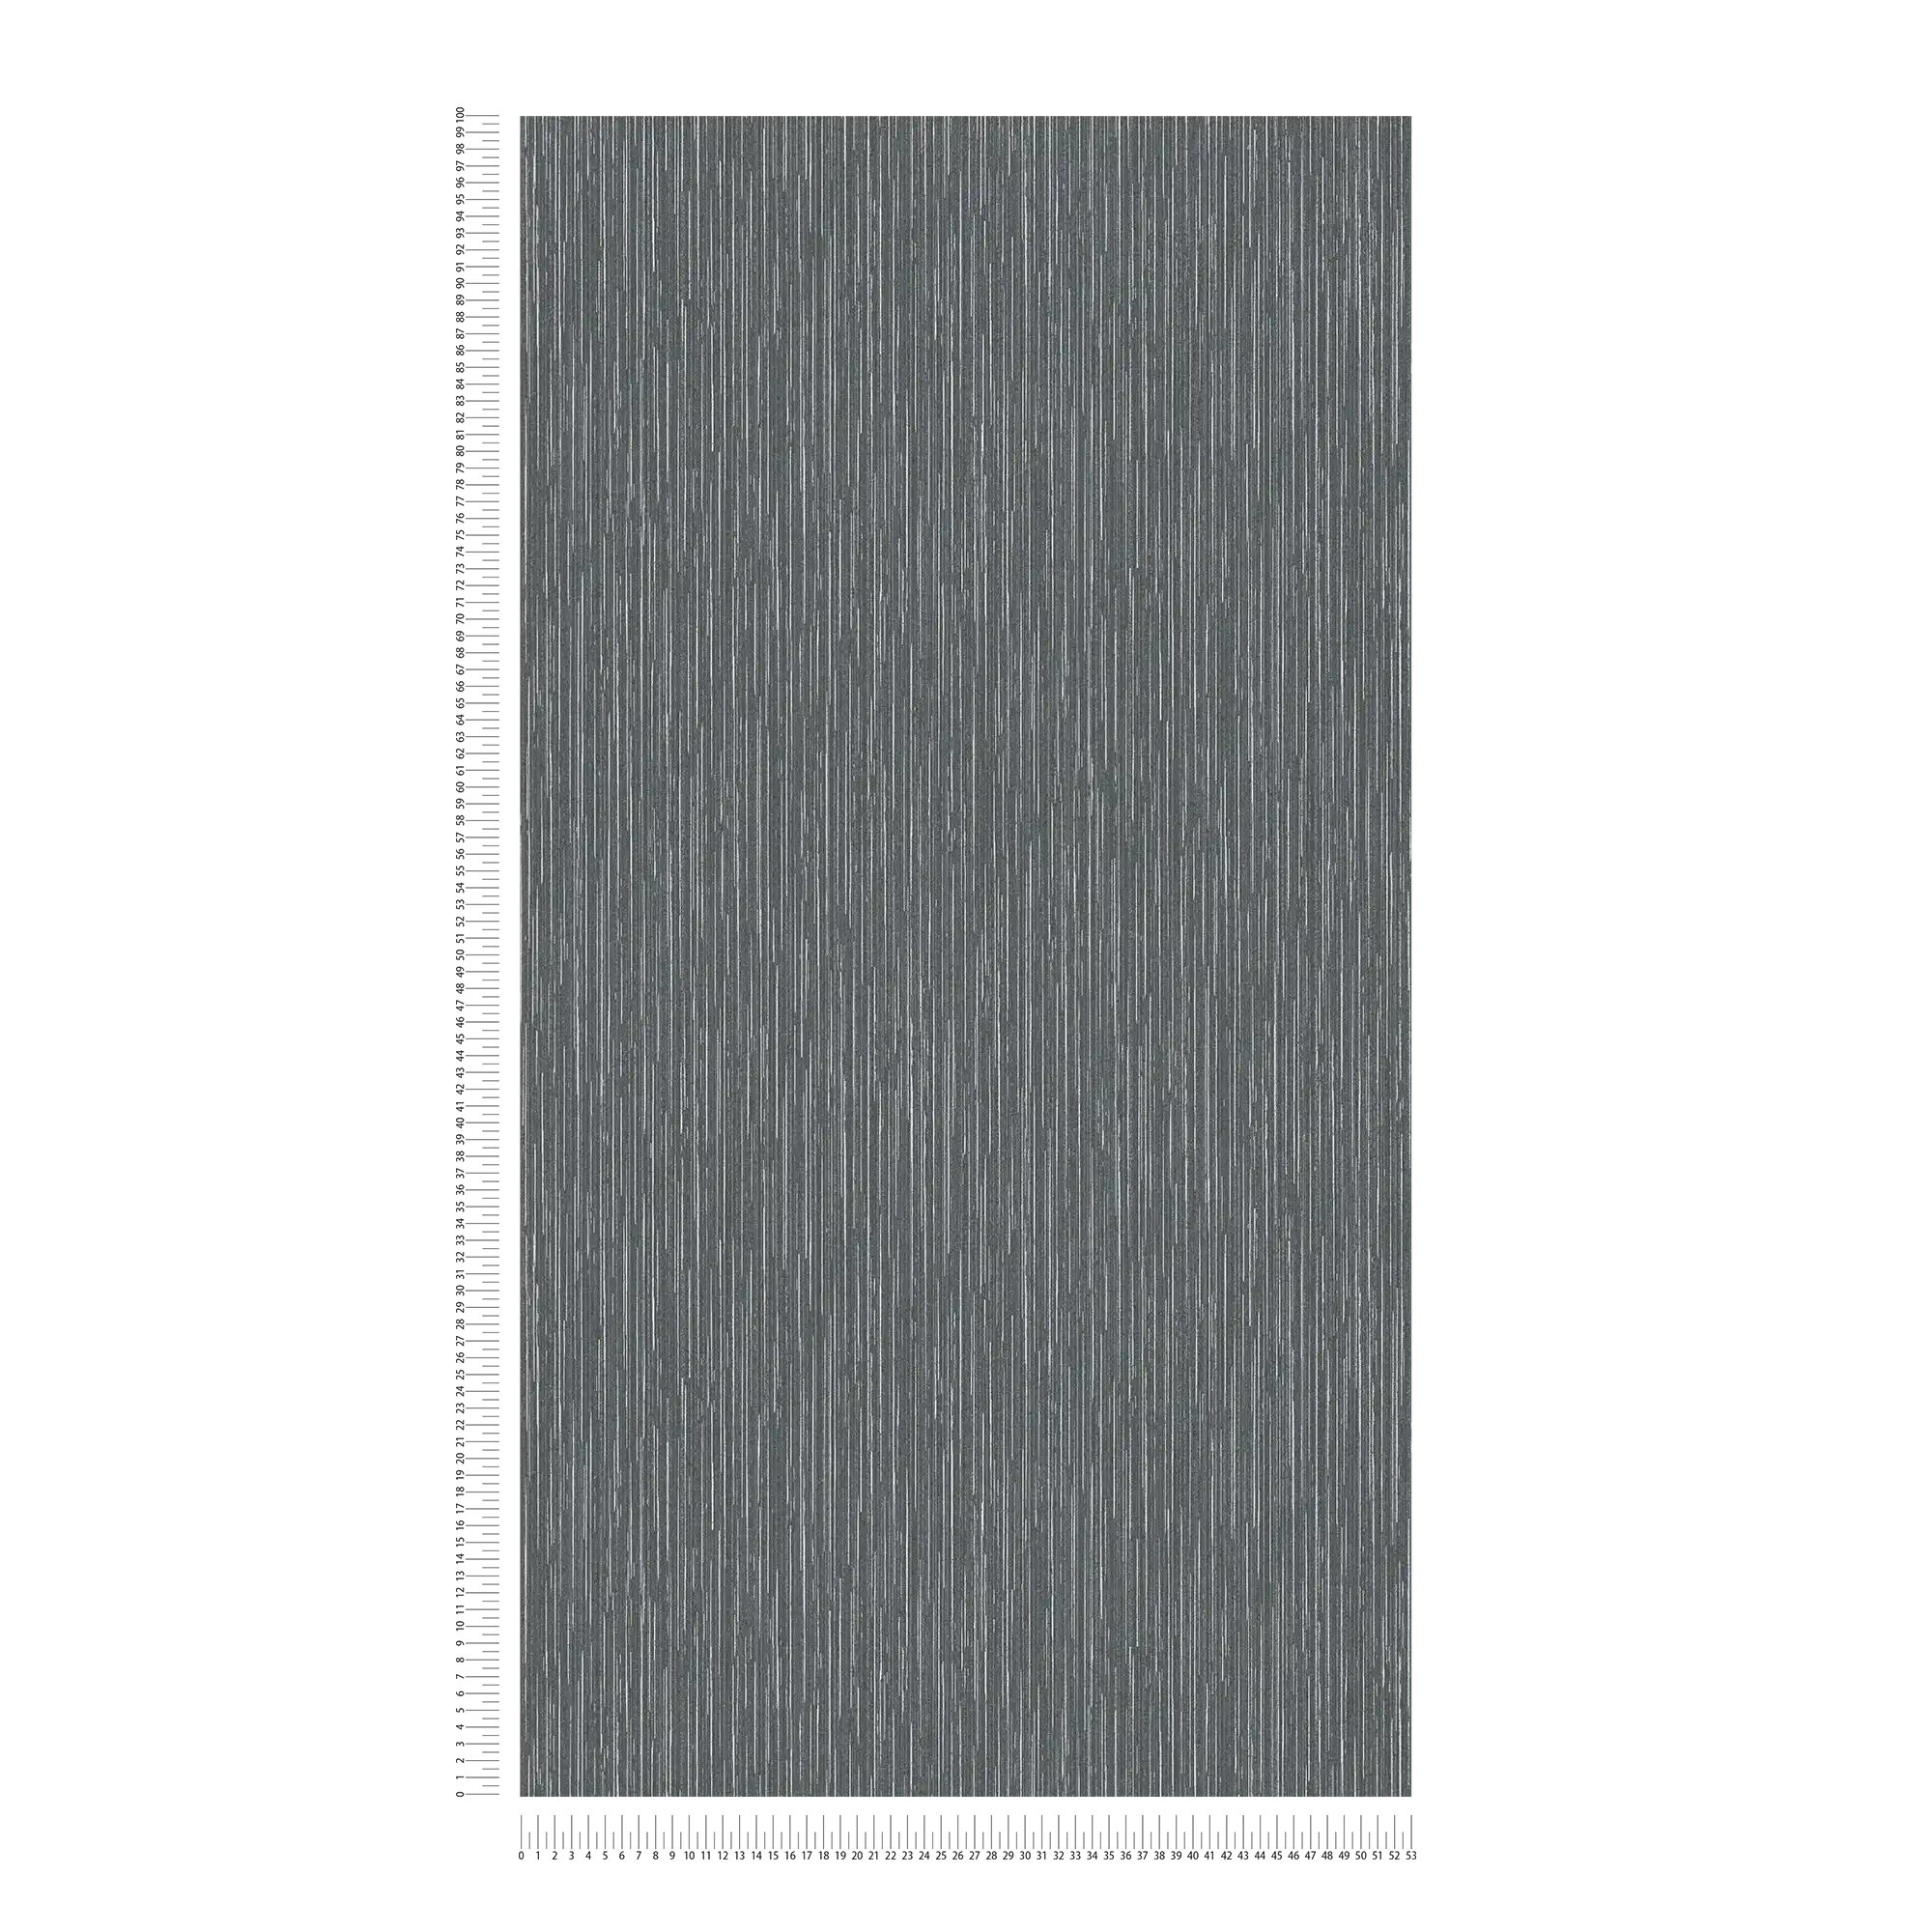             Anthracite wallpaper with silver accents & line design - black, metallic
        